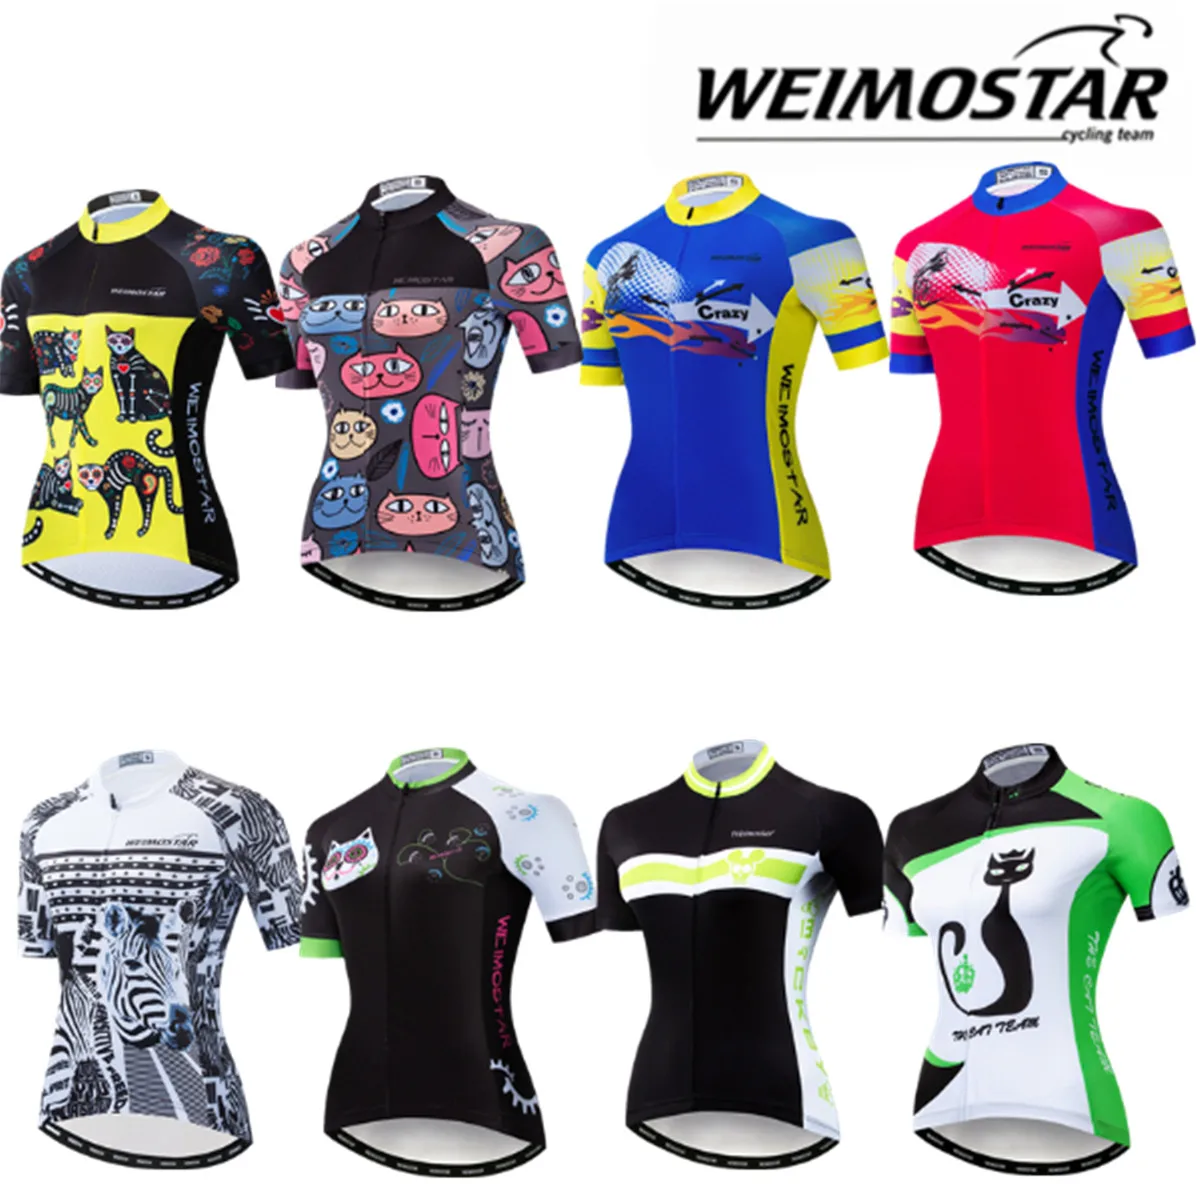 weimostar Cycling jersey Women Mountain Bike jersey Tops Short sleeve summer breathable quick dry 